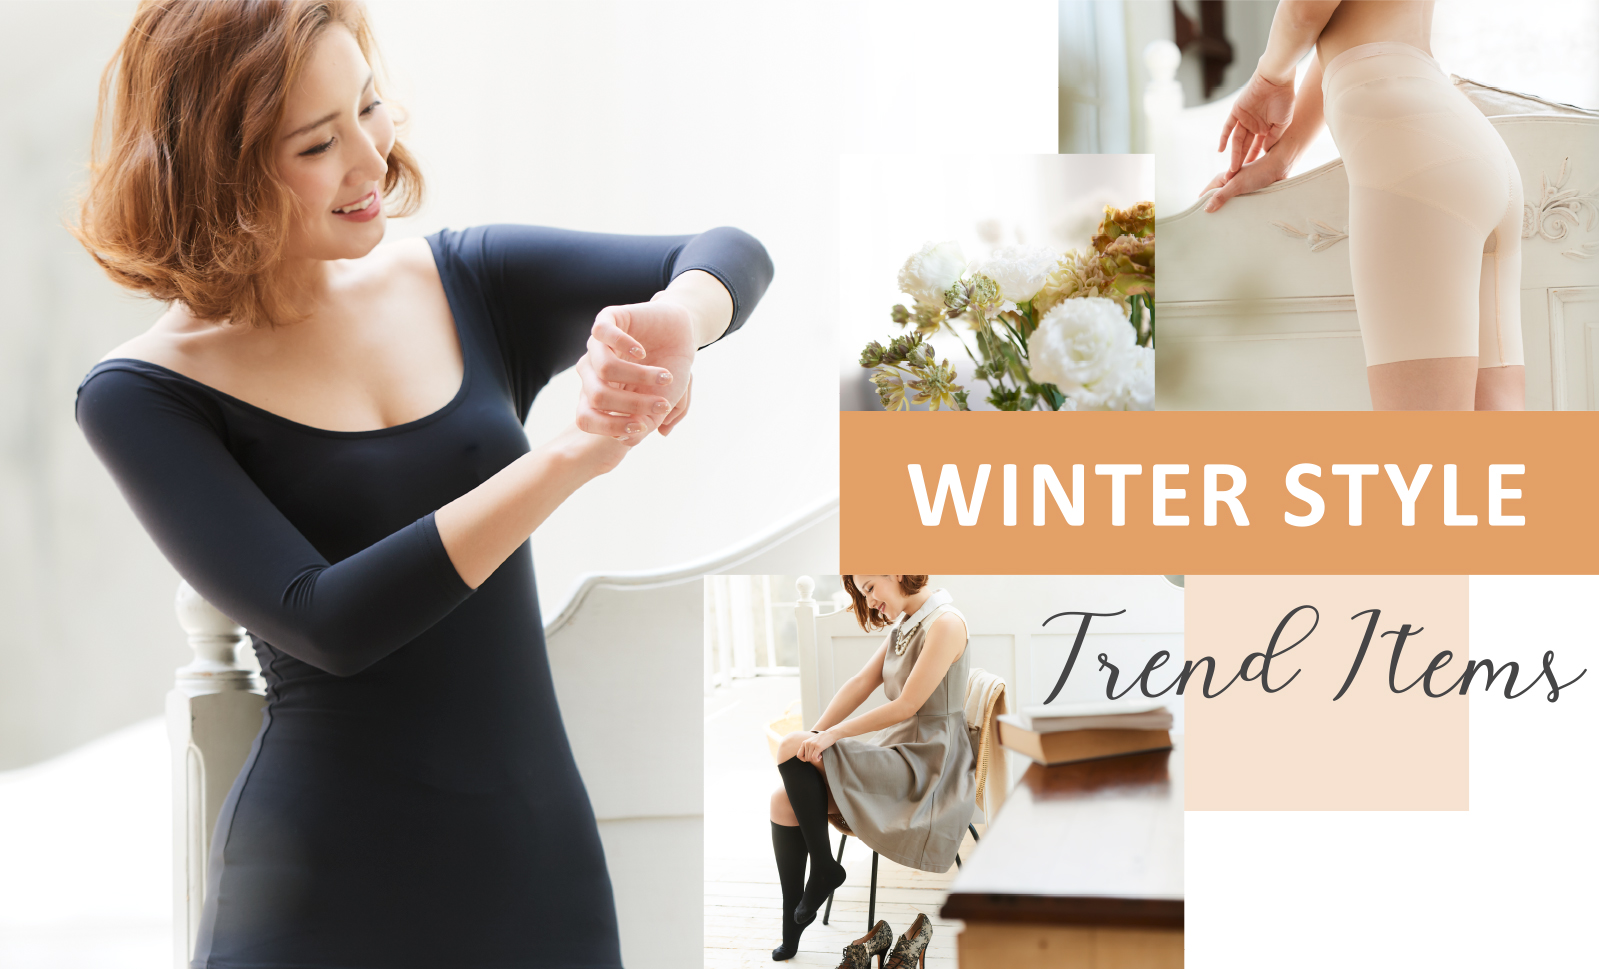 WINTER STYLE Trend Items